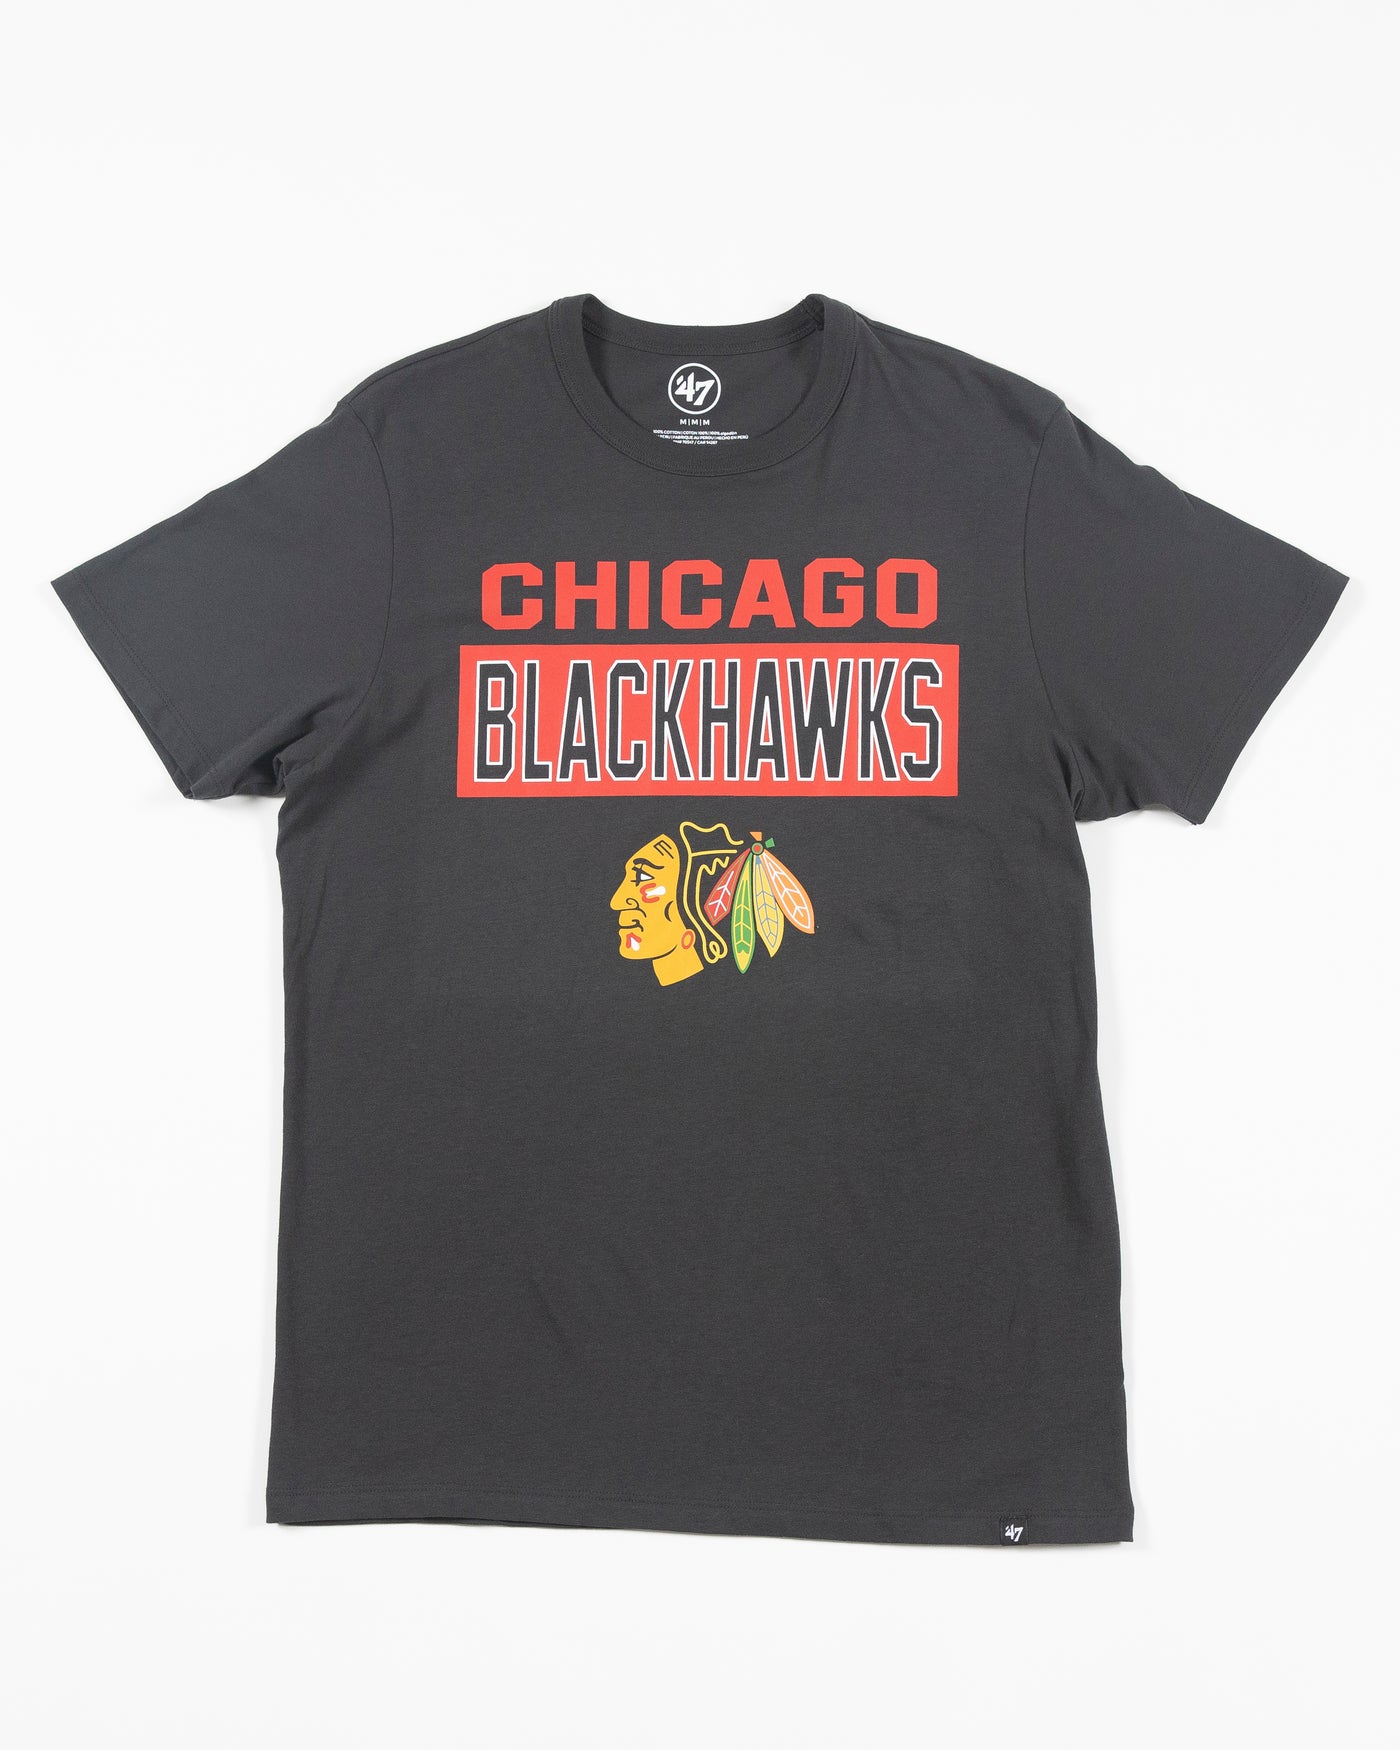 '47 brand black tee with Chicago Blackhawks wordmark and primary logo across chest - front lay flat